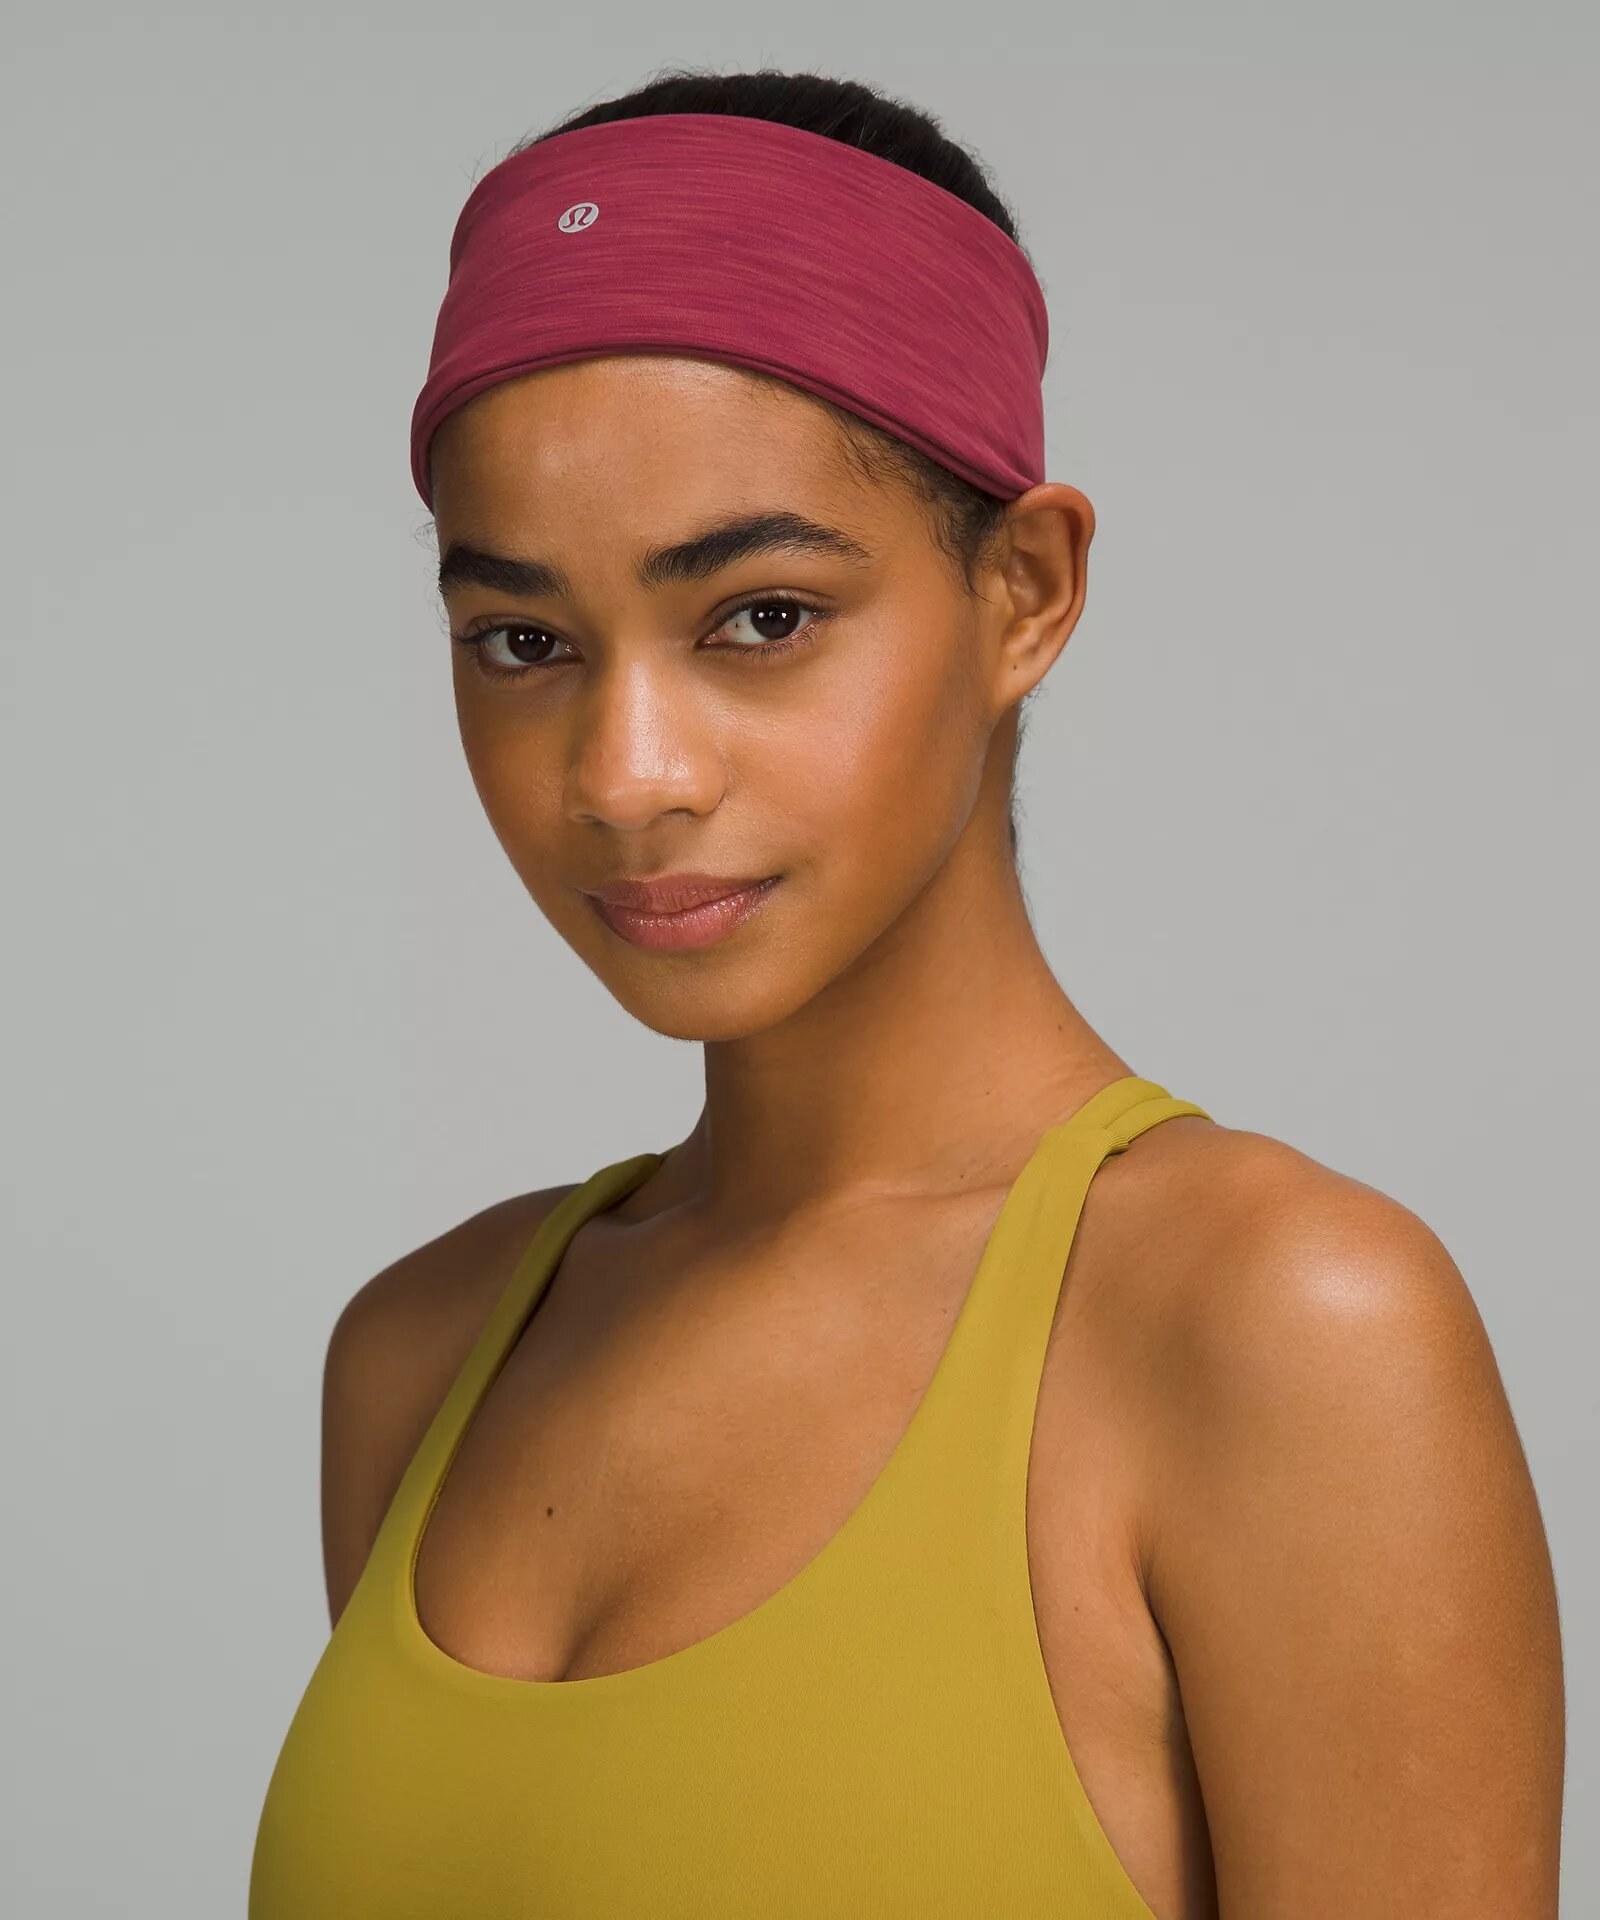 A person wearing the headband and a sports bra